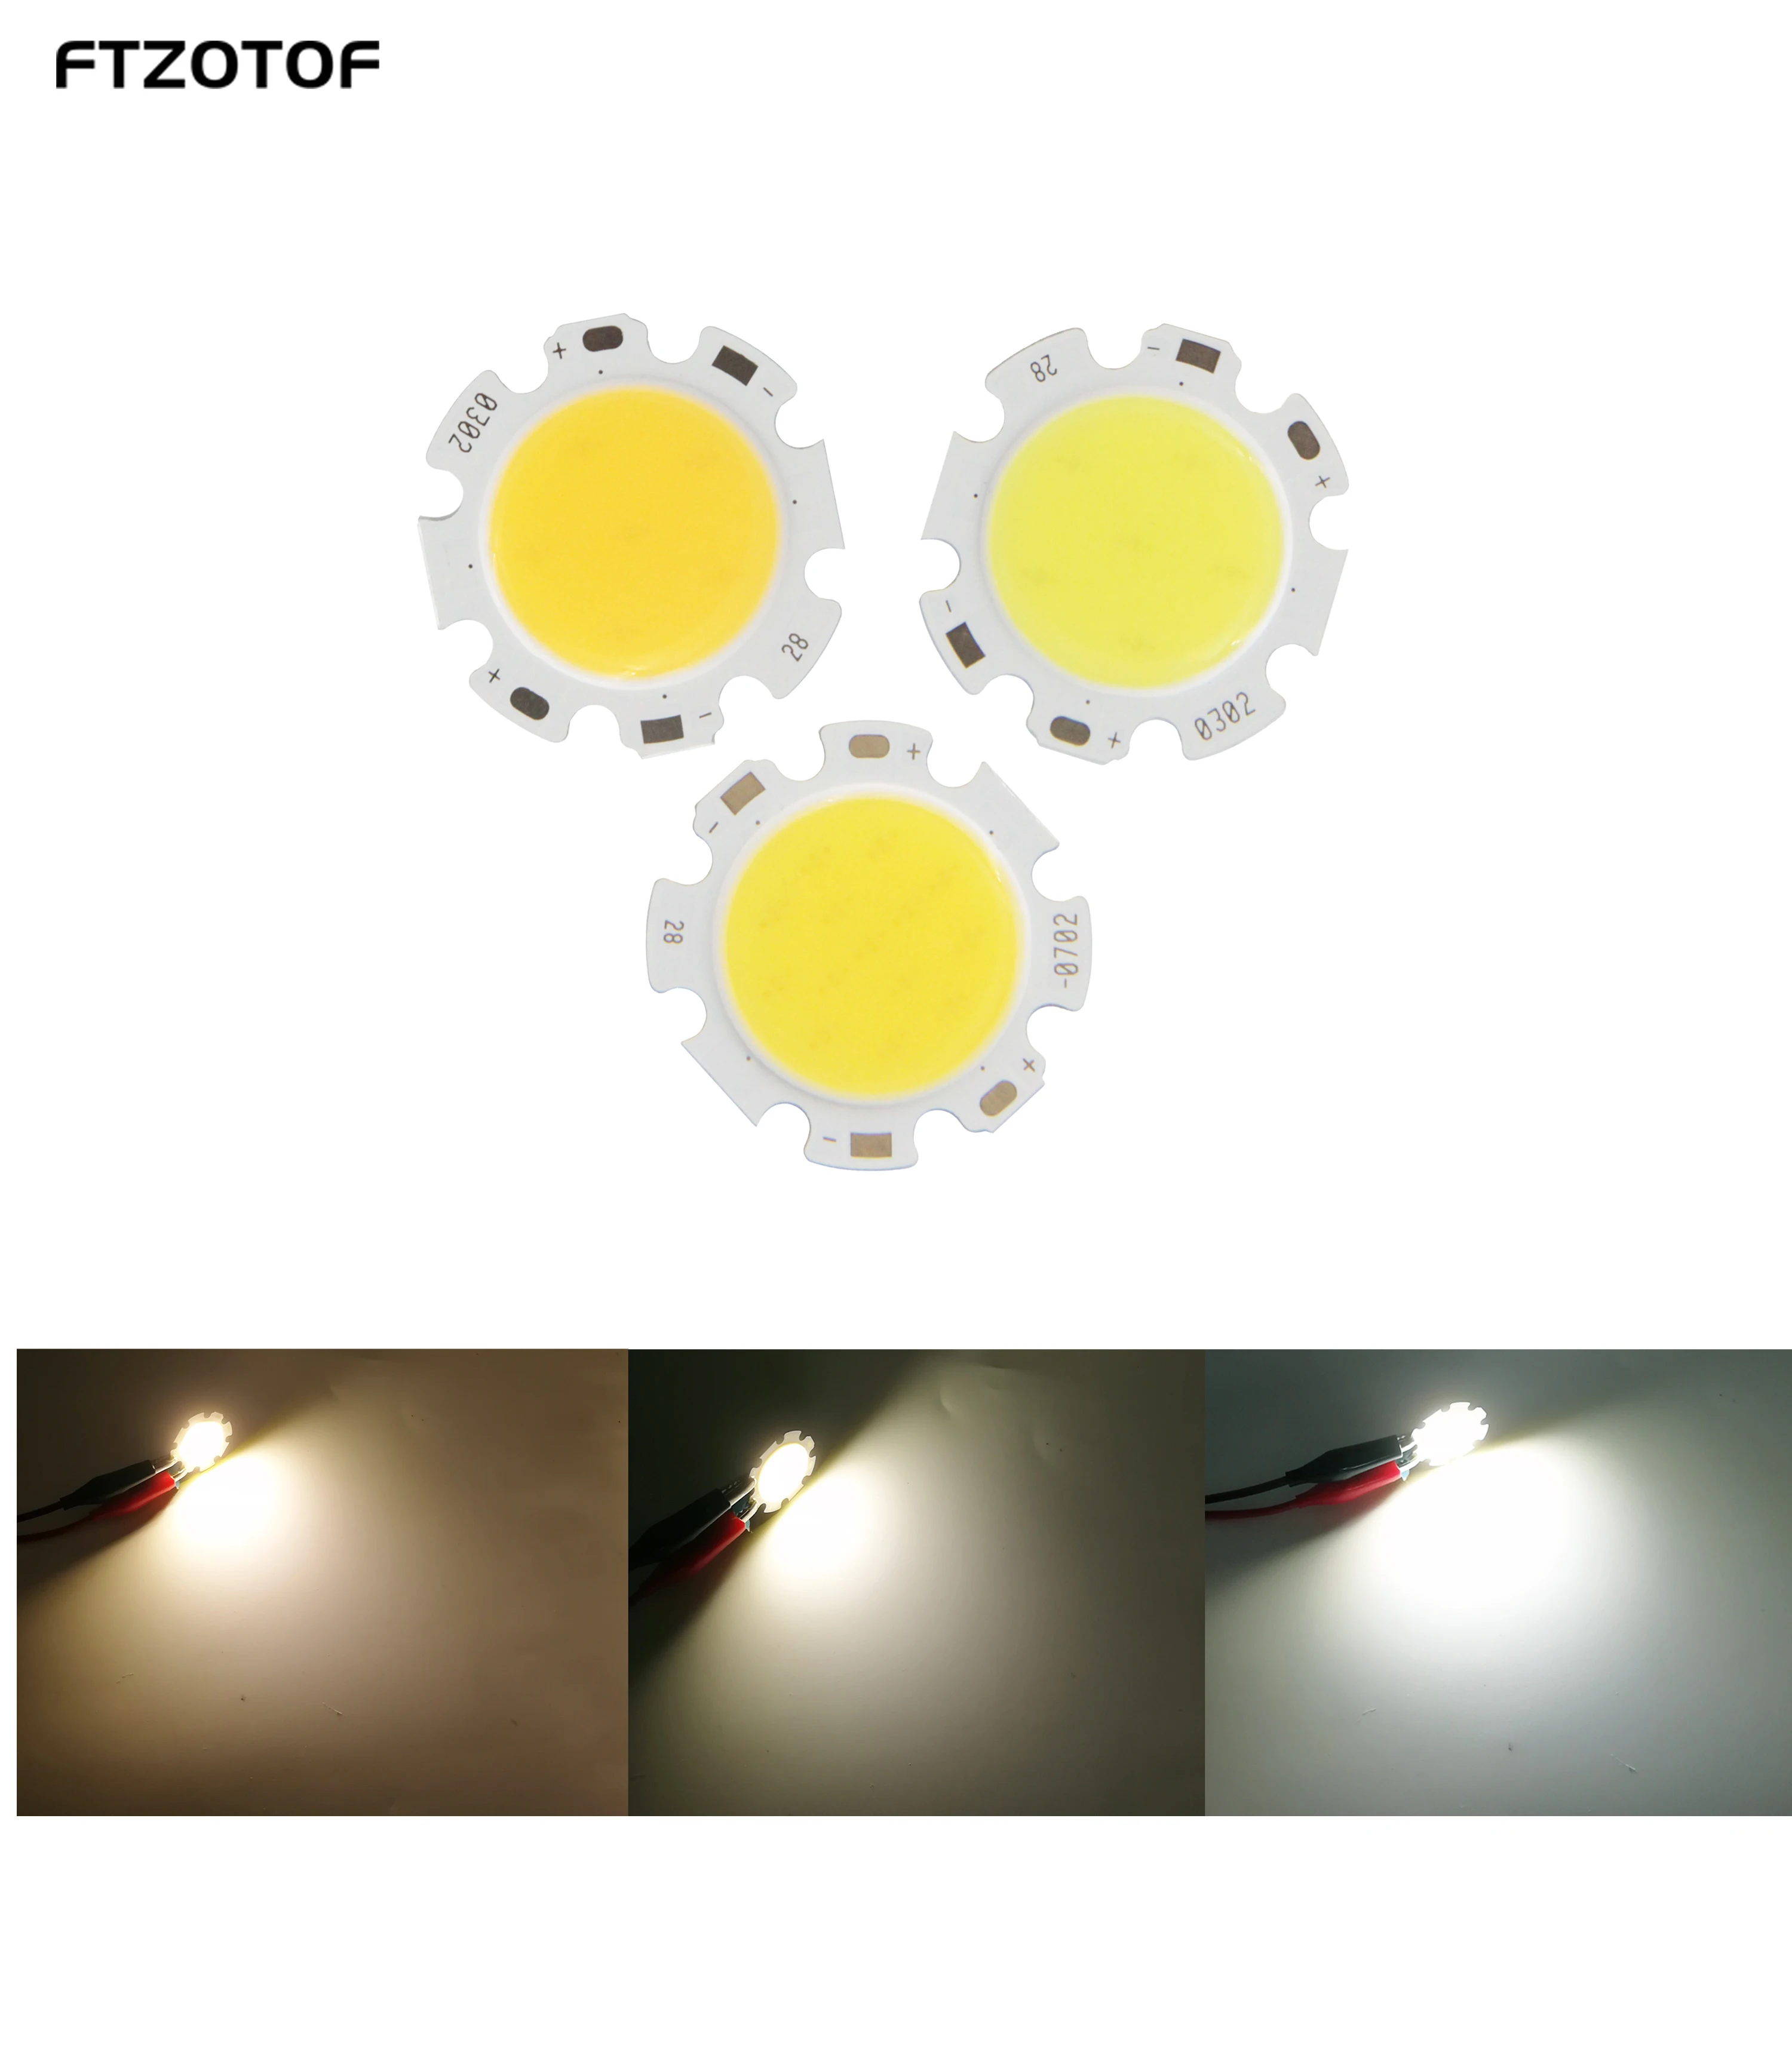 

10PCS 12W COB LED Light Source Rounded Chip On Board 28mm Dc 36v-40V 1200LM Warm Cold White Bulbs for LED DIY Ceiling House Lamp